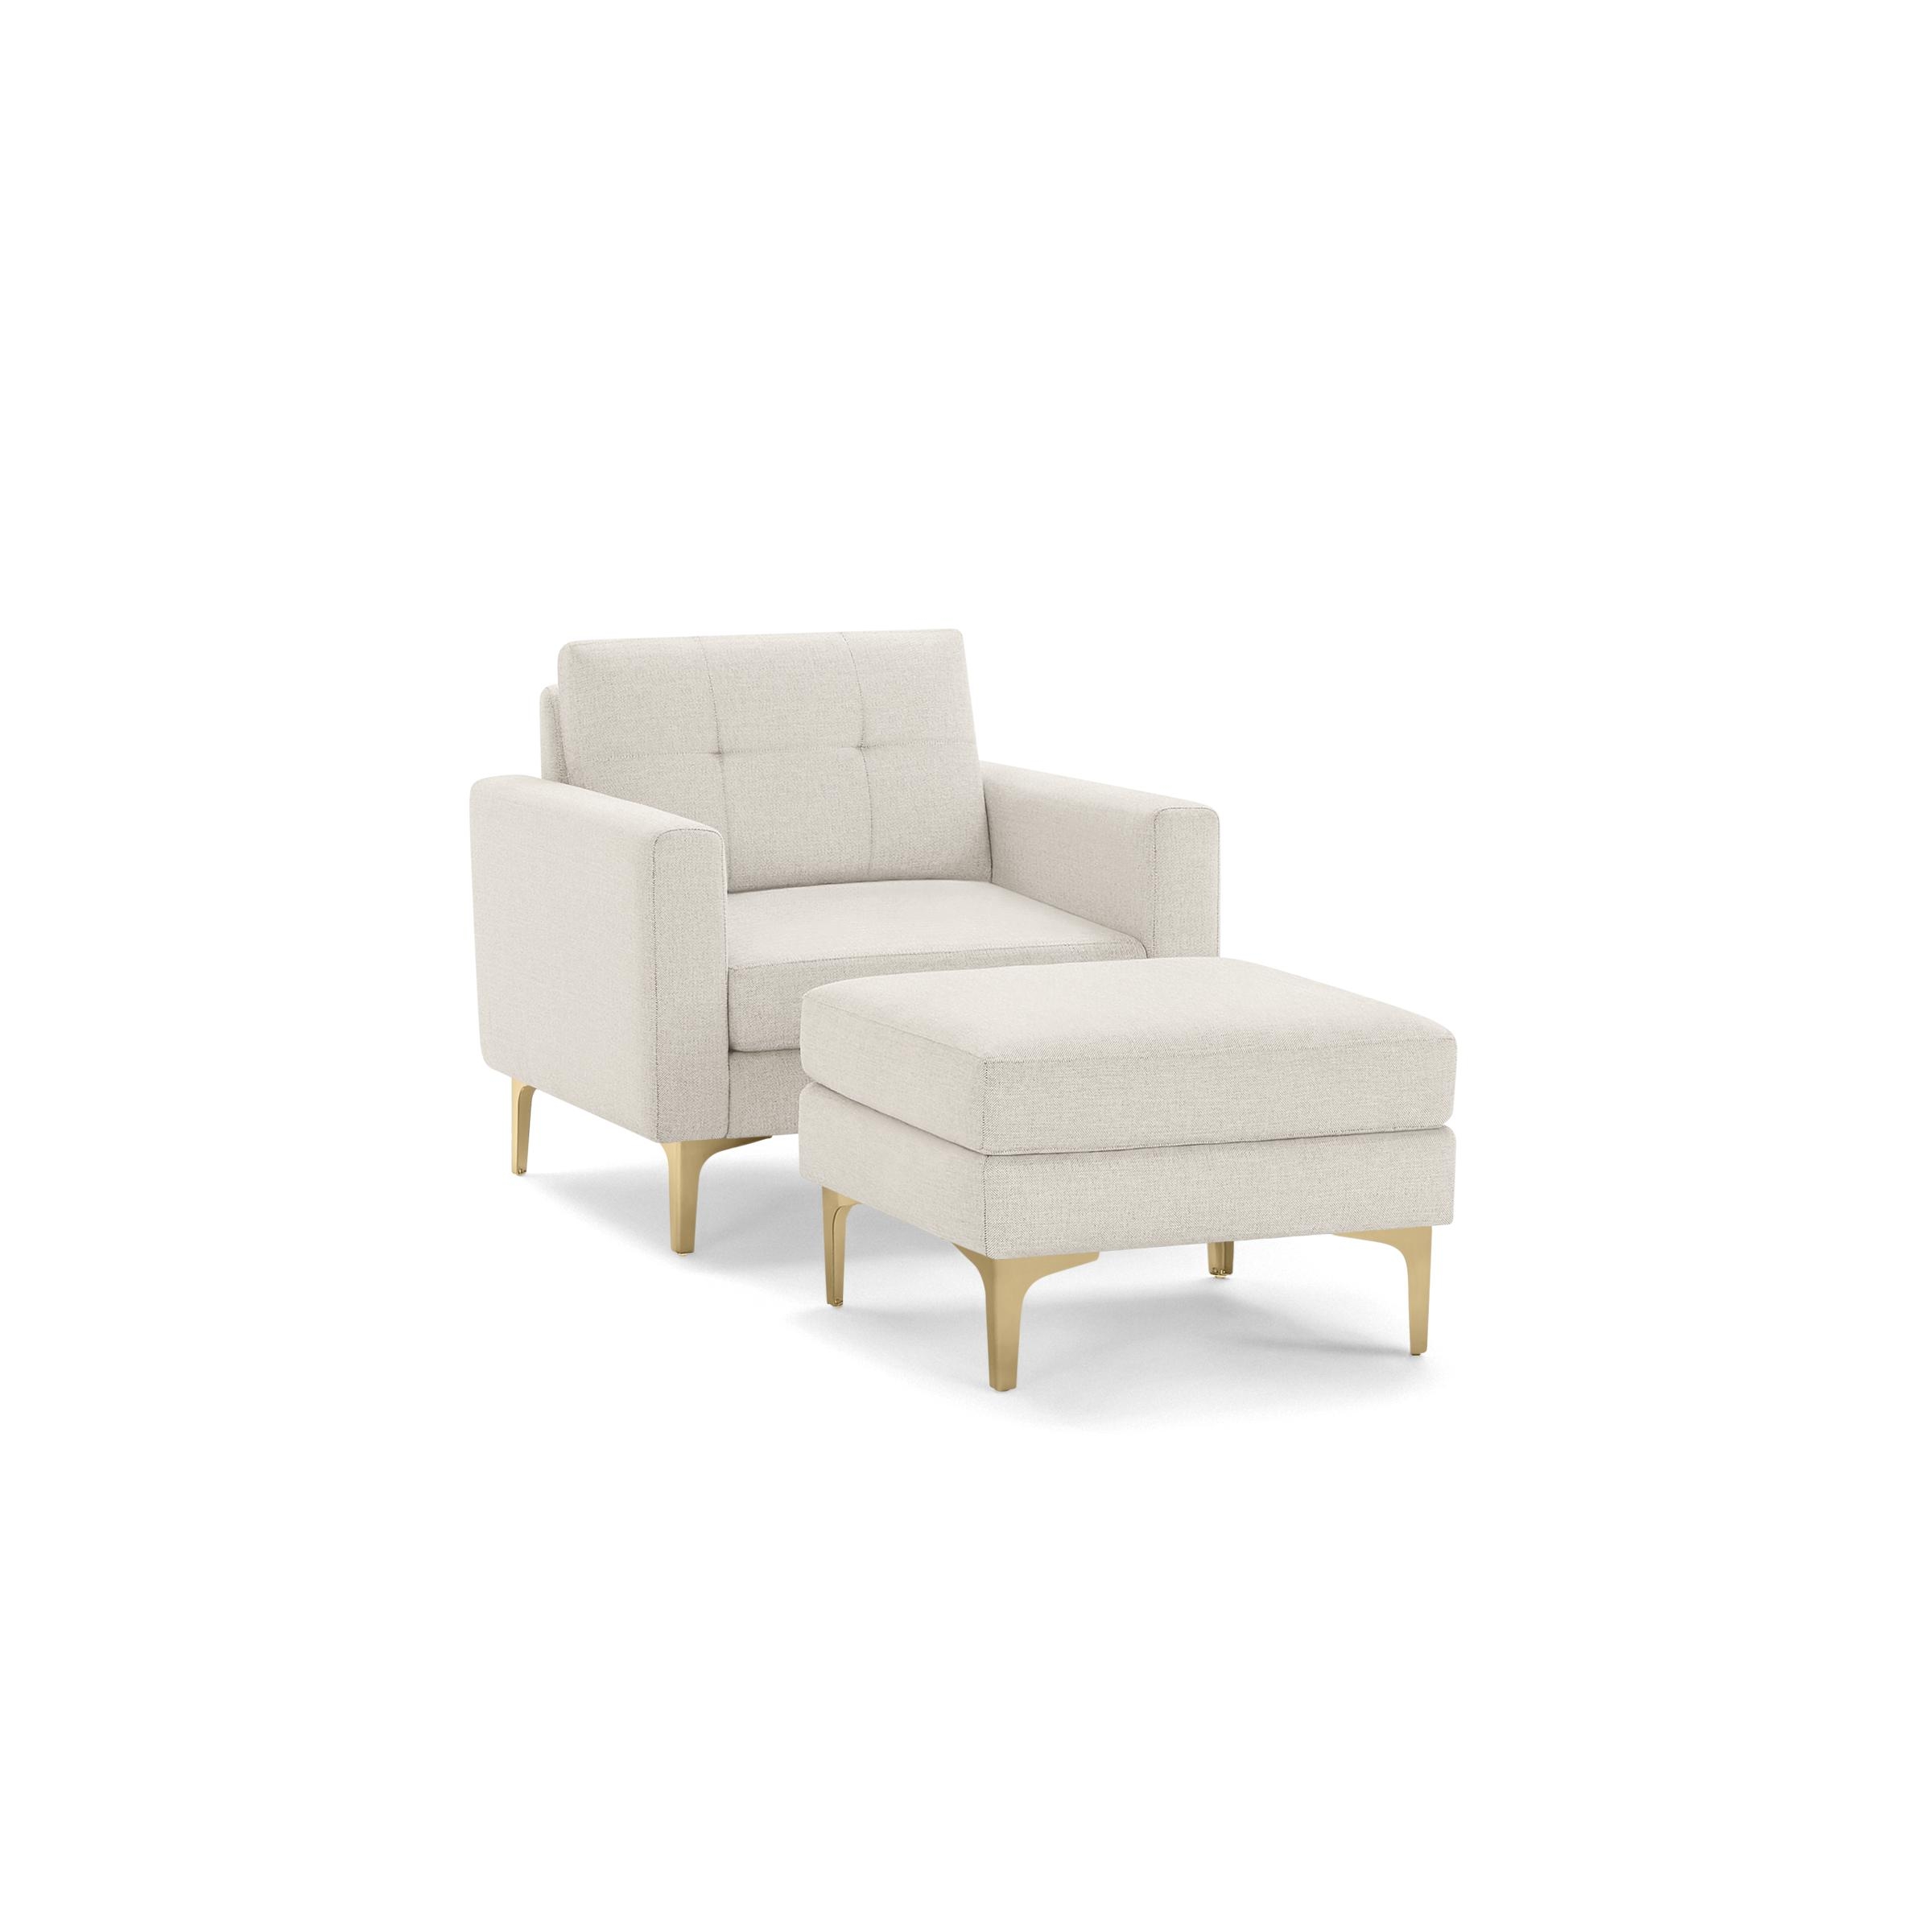 Nomad Armchair and Ottoman in Ivory, Brass Legs - Image 0